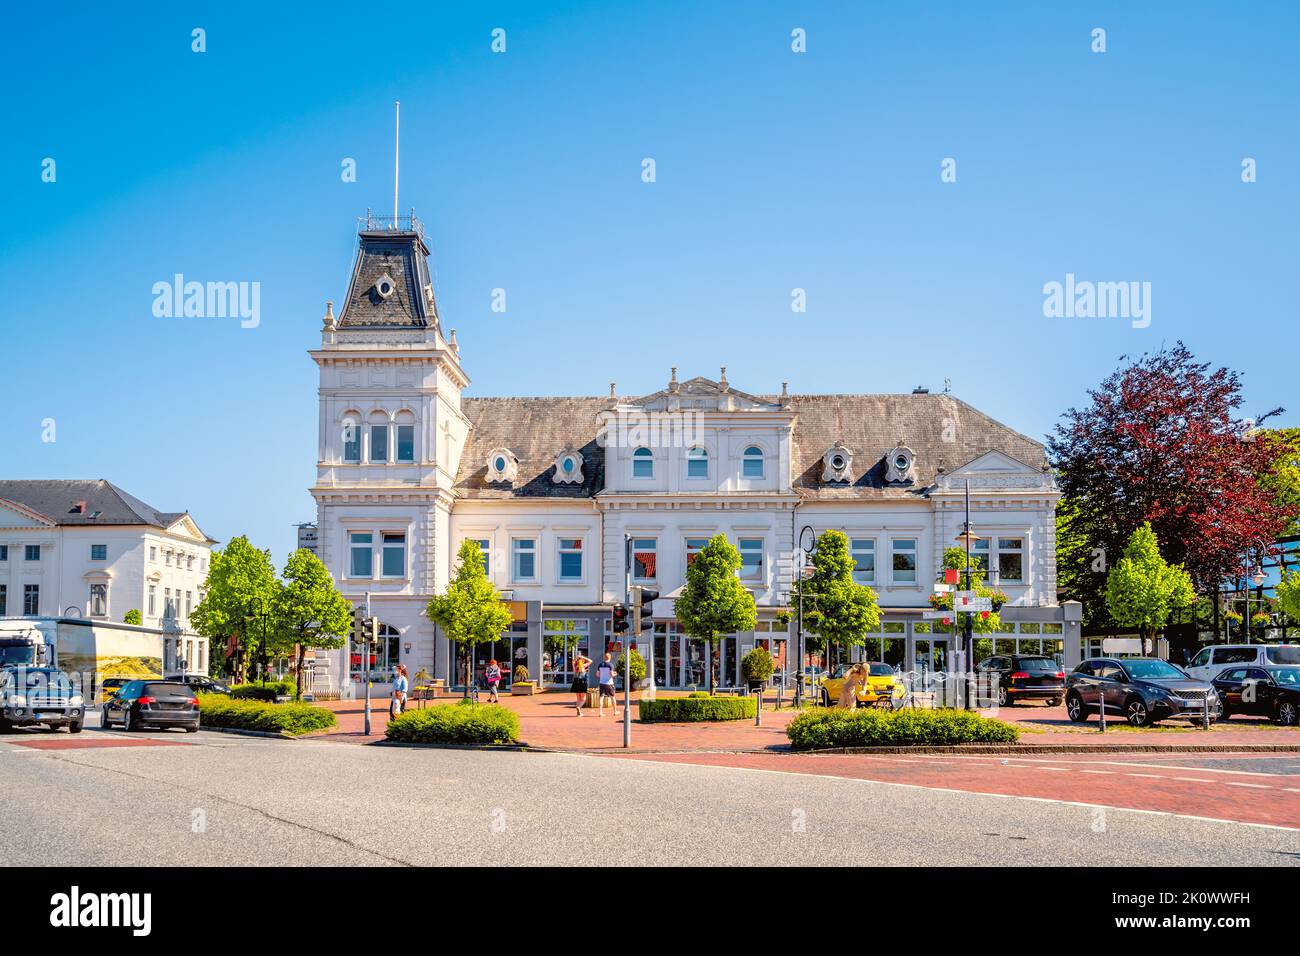 City hall in Jever, East Friesland, North Sea, Germany Stock Photo